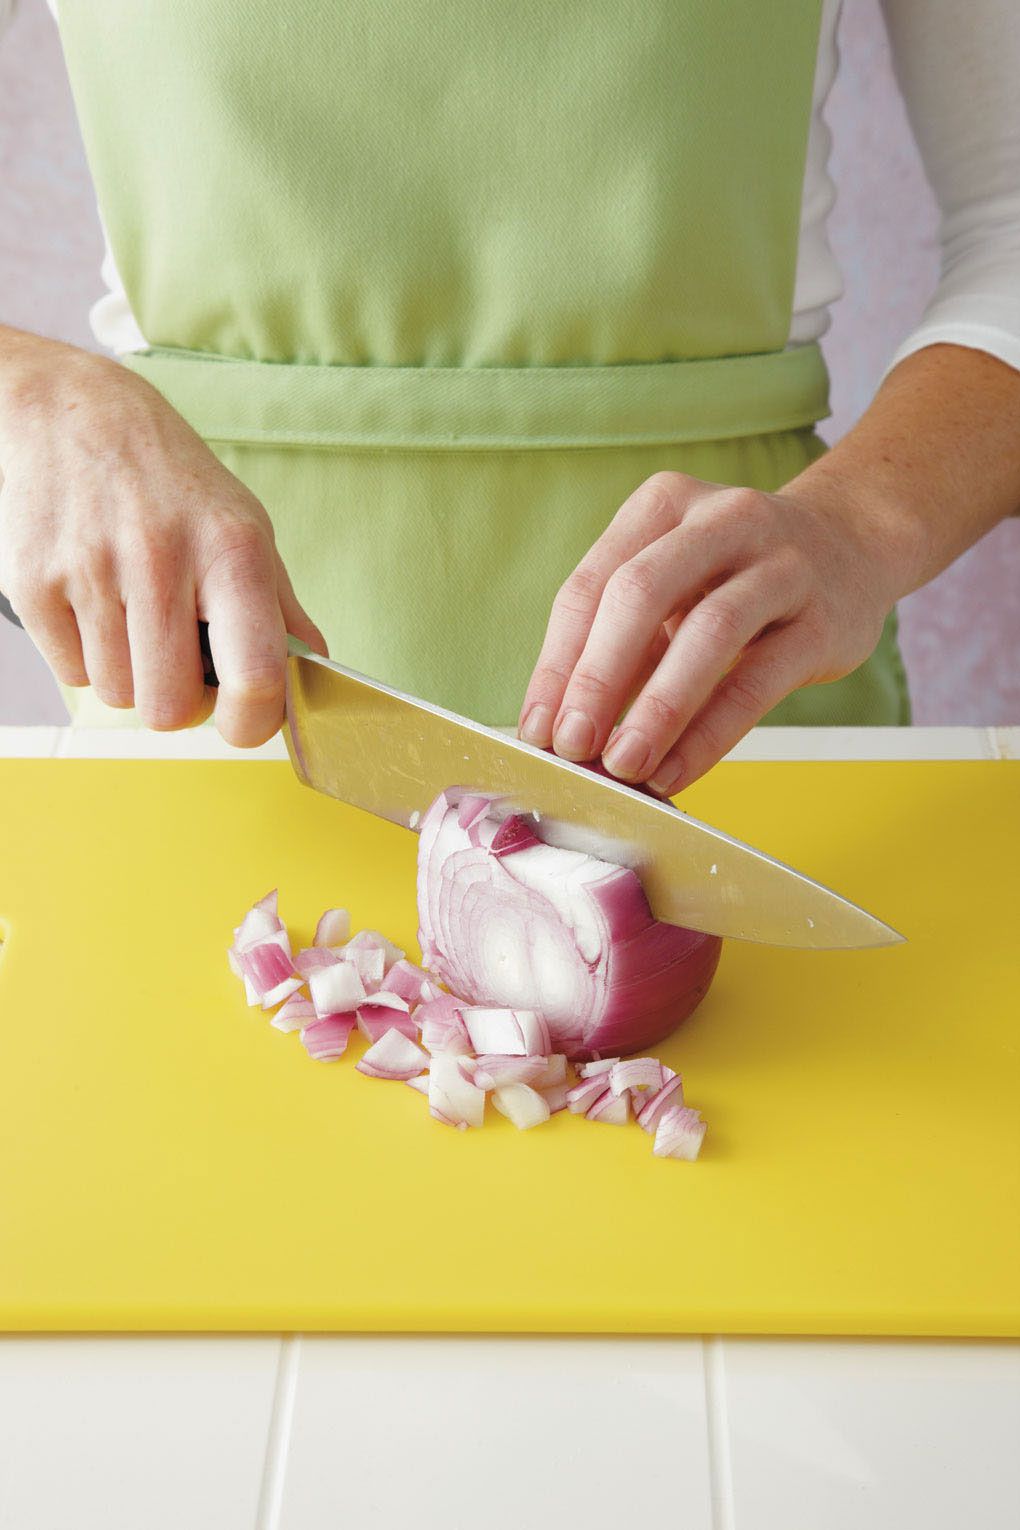 Chopping a Red Onion